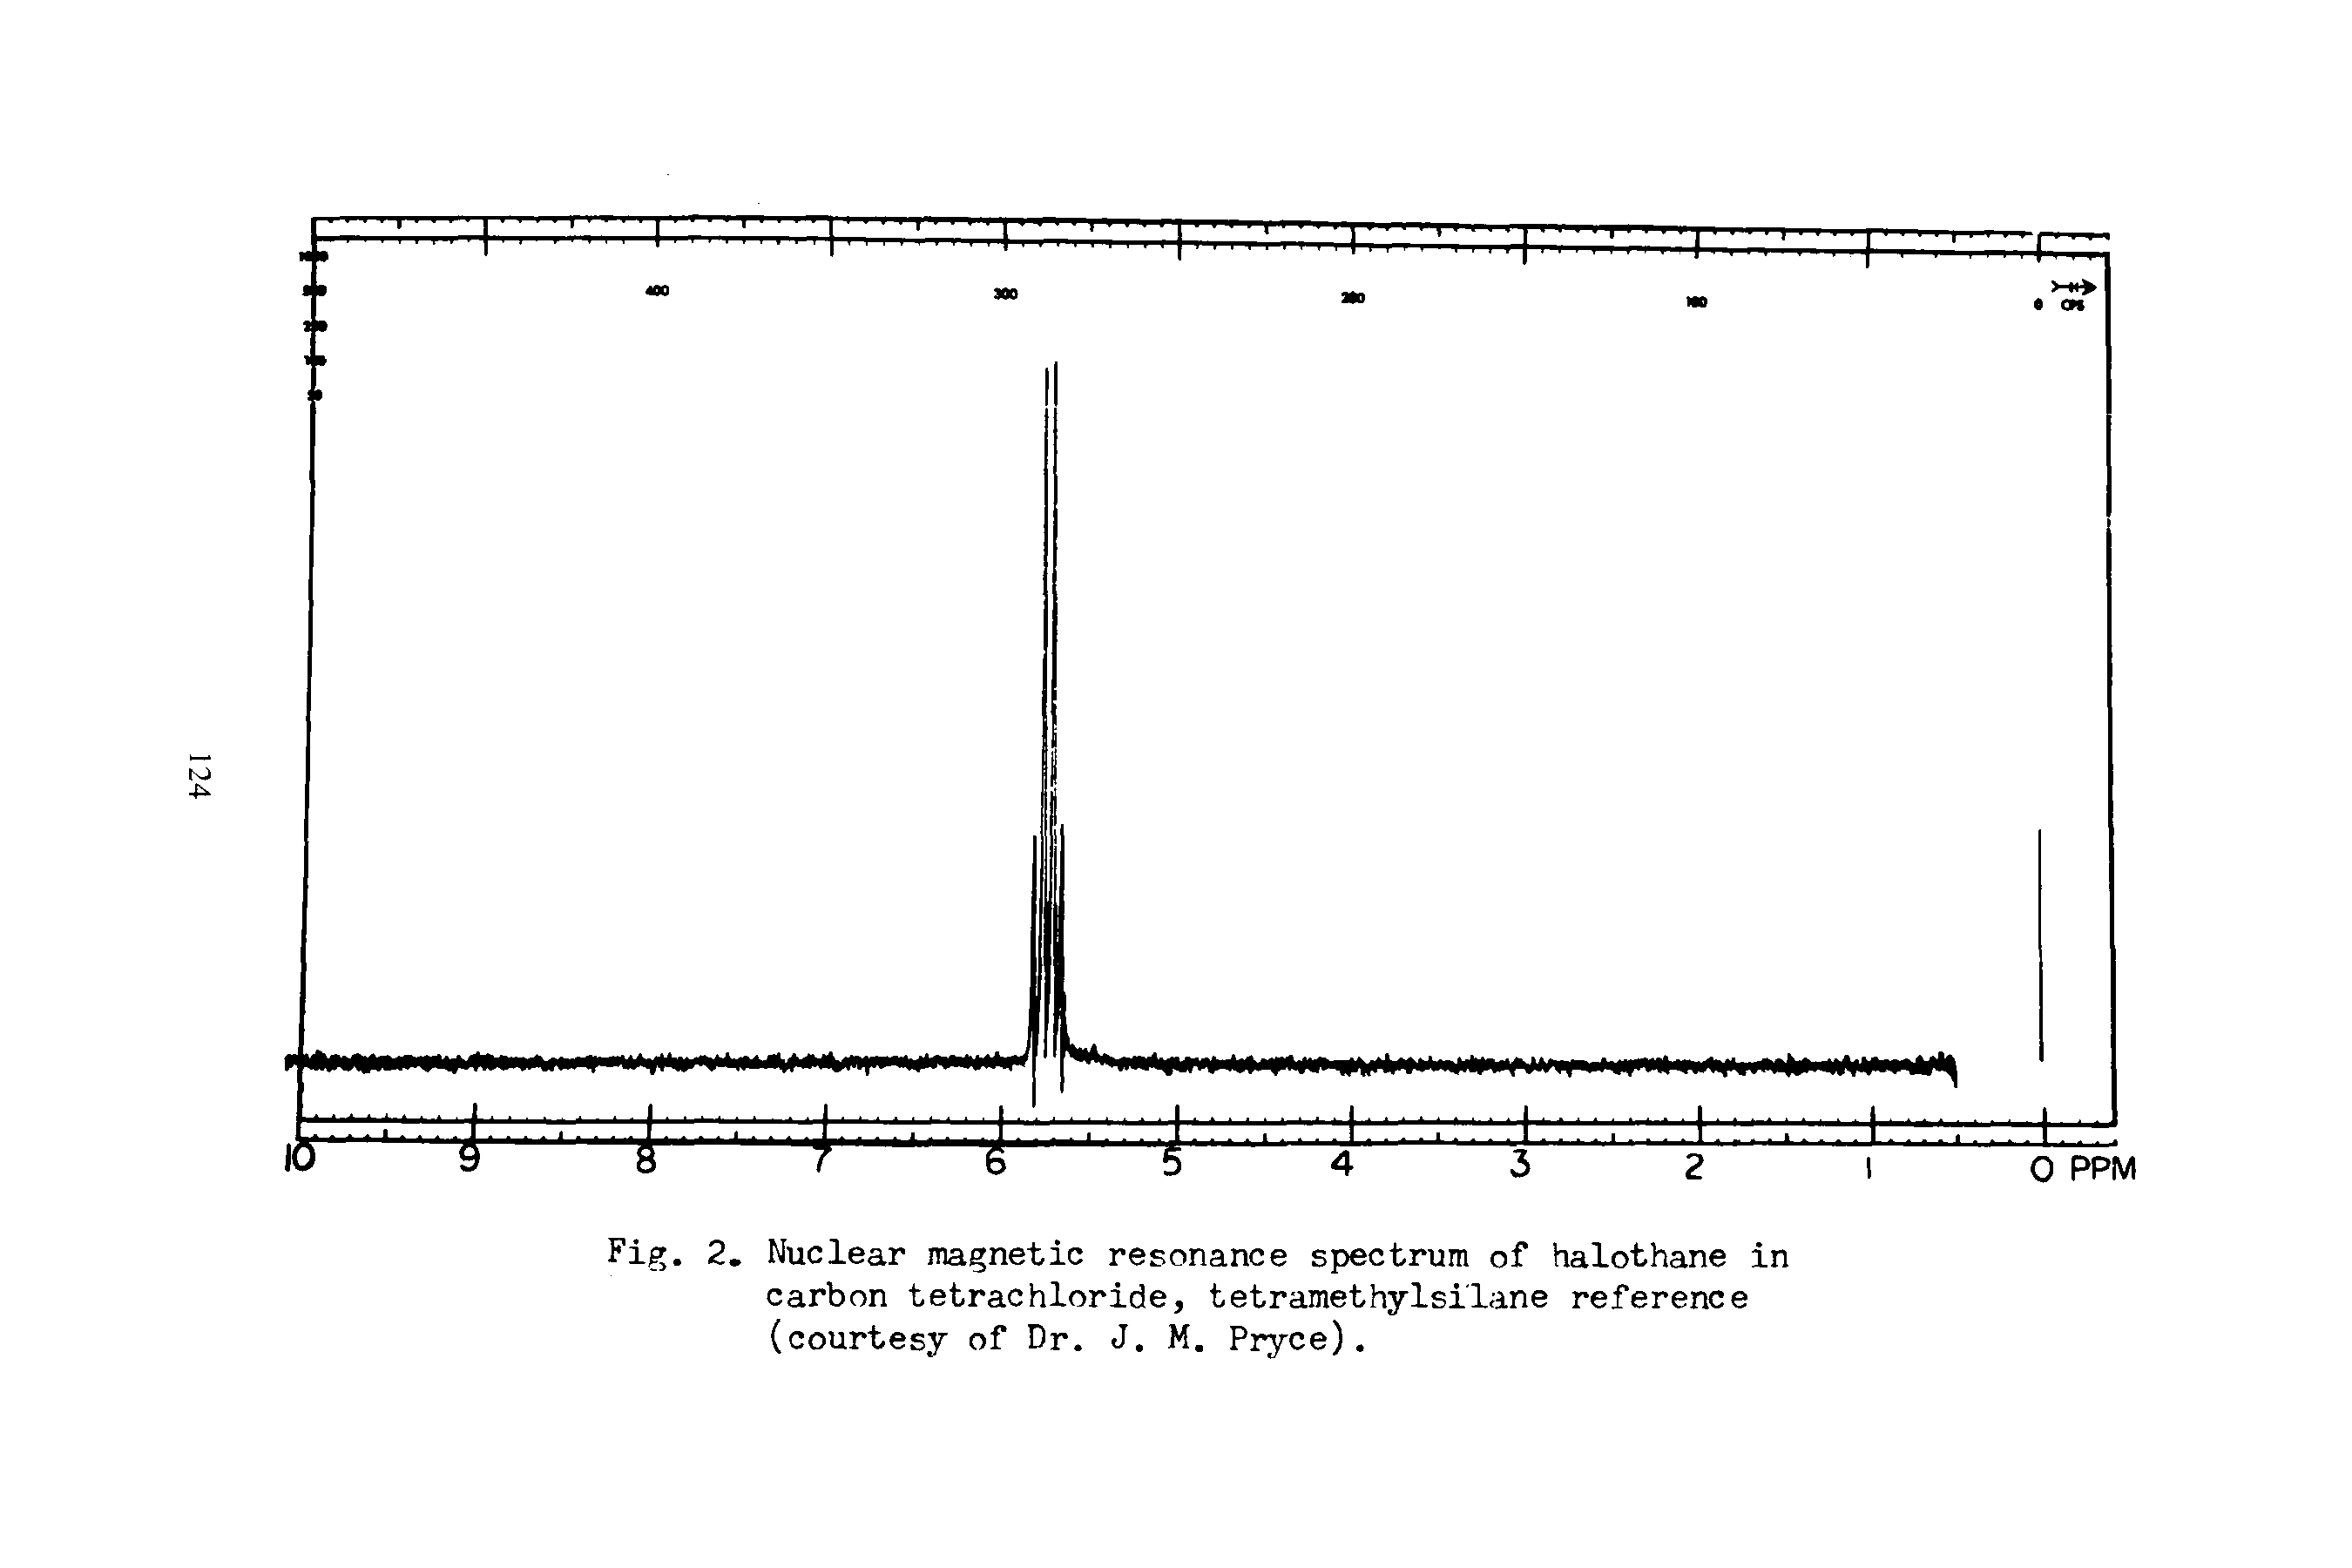 Fig. 2. Nuclear magnetic resonance spectrum of halothane in carbon tetrachloride, tetramethylsilane reference (courtesy of Dr. J. M. Pryce).